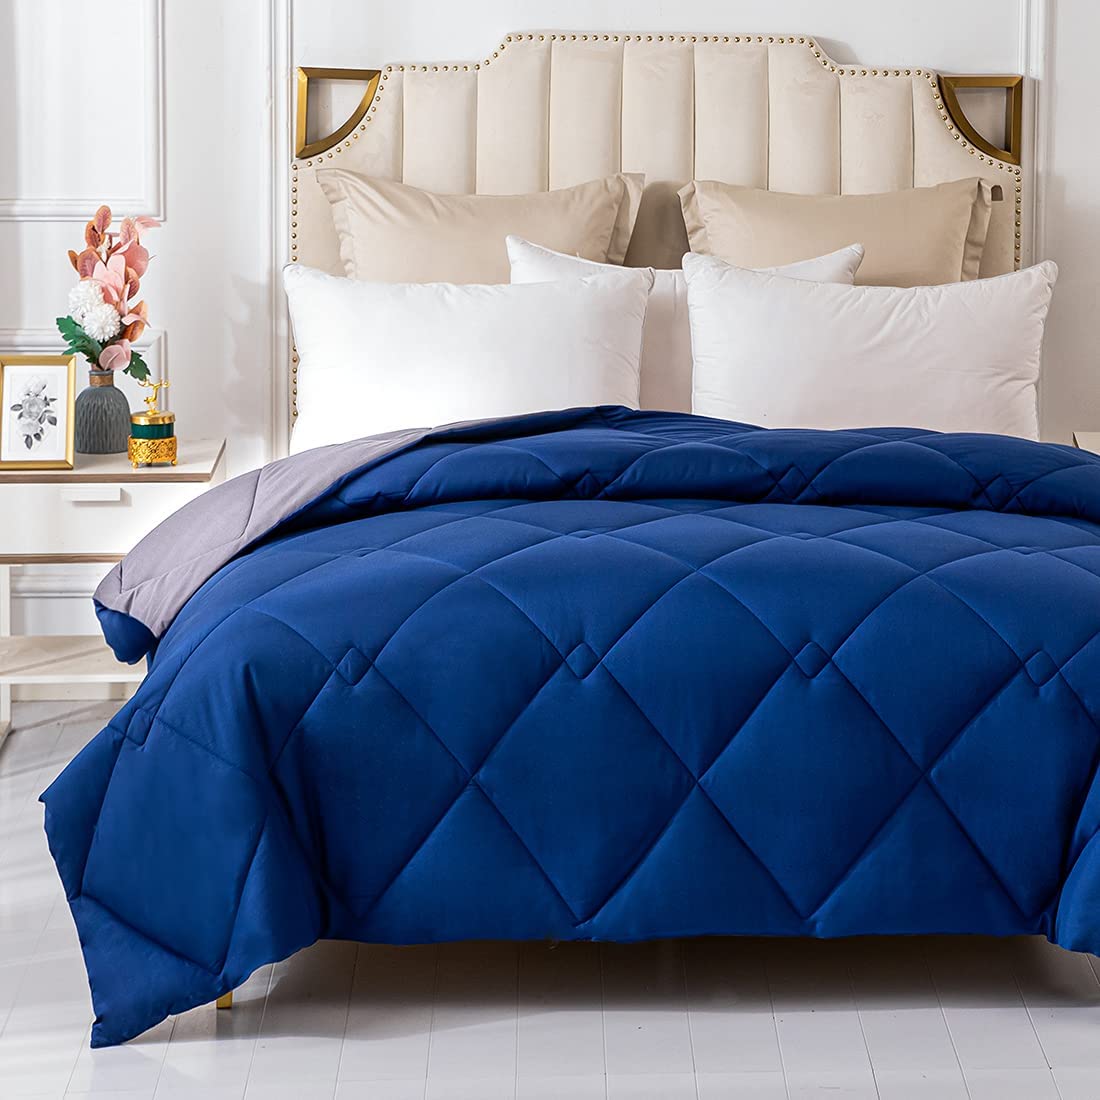 Price:$31.99 Wamsound All-Season Down Alternative Quilted Comforter,Comfortable Sleep Quilt Bedding,Reversible Duvet Insert with Corner Tabs,Winter Warmth Breathable,Super Soft,Machine Washable : Home & Kitchen